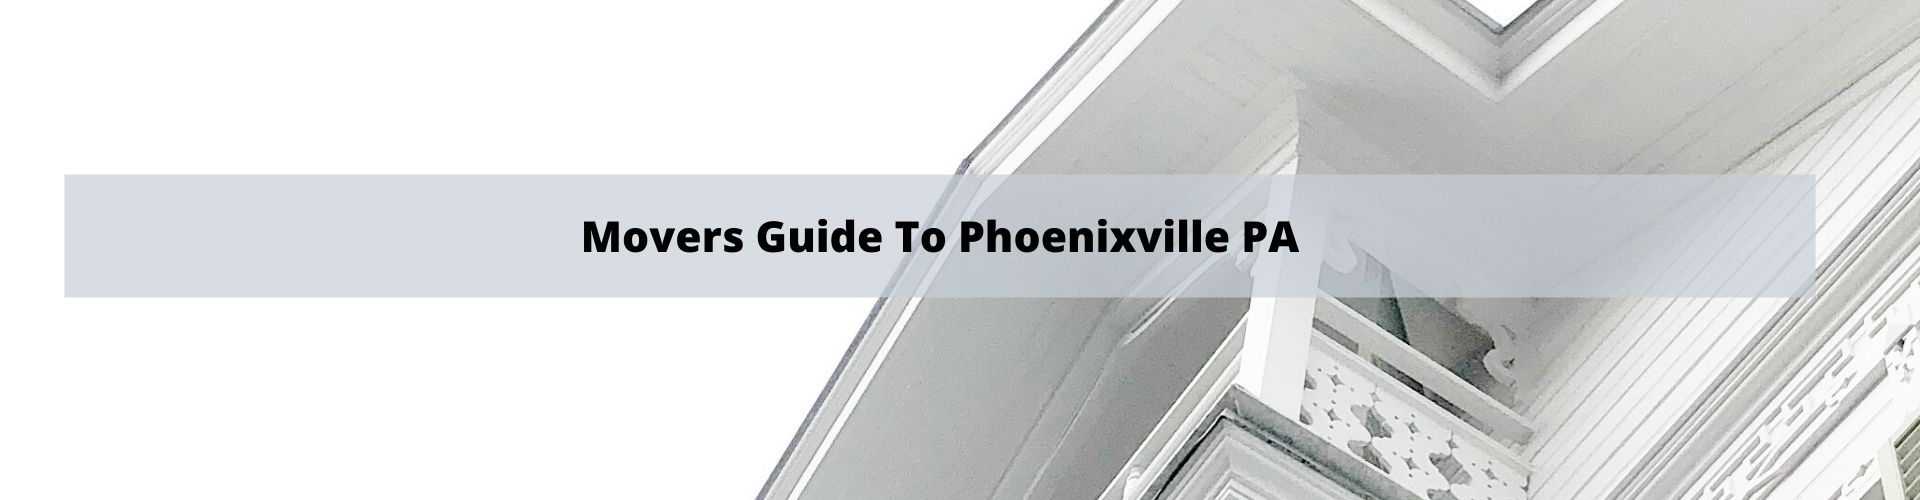 Mover's Guide to Phoenixville PA